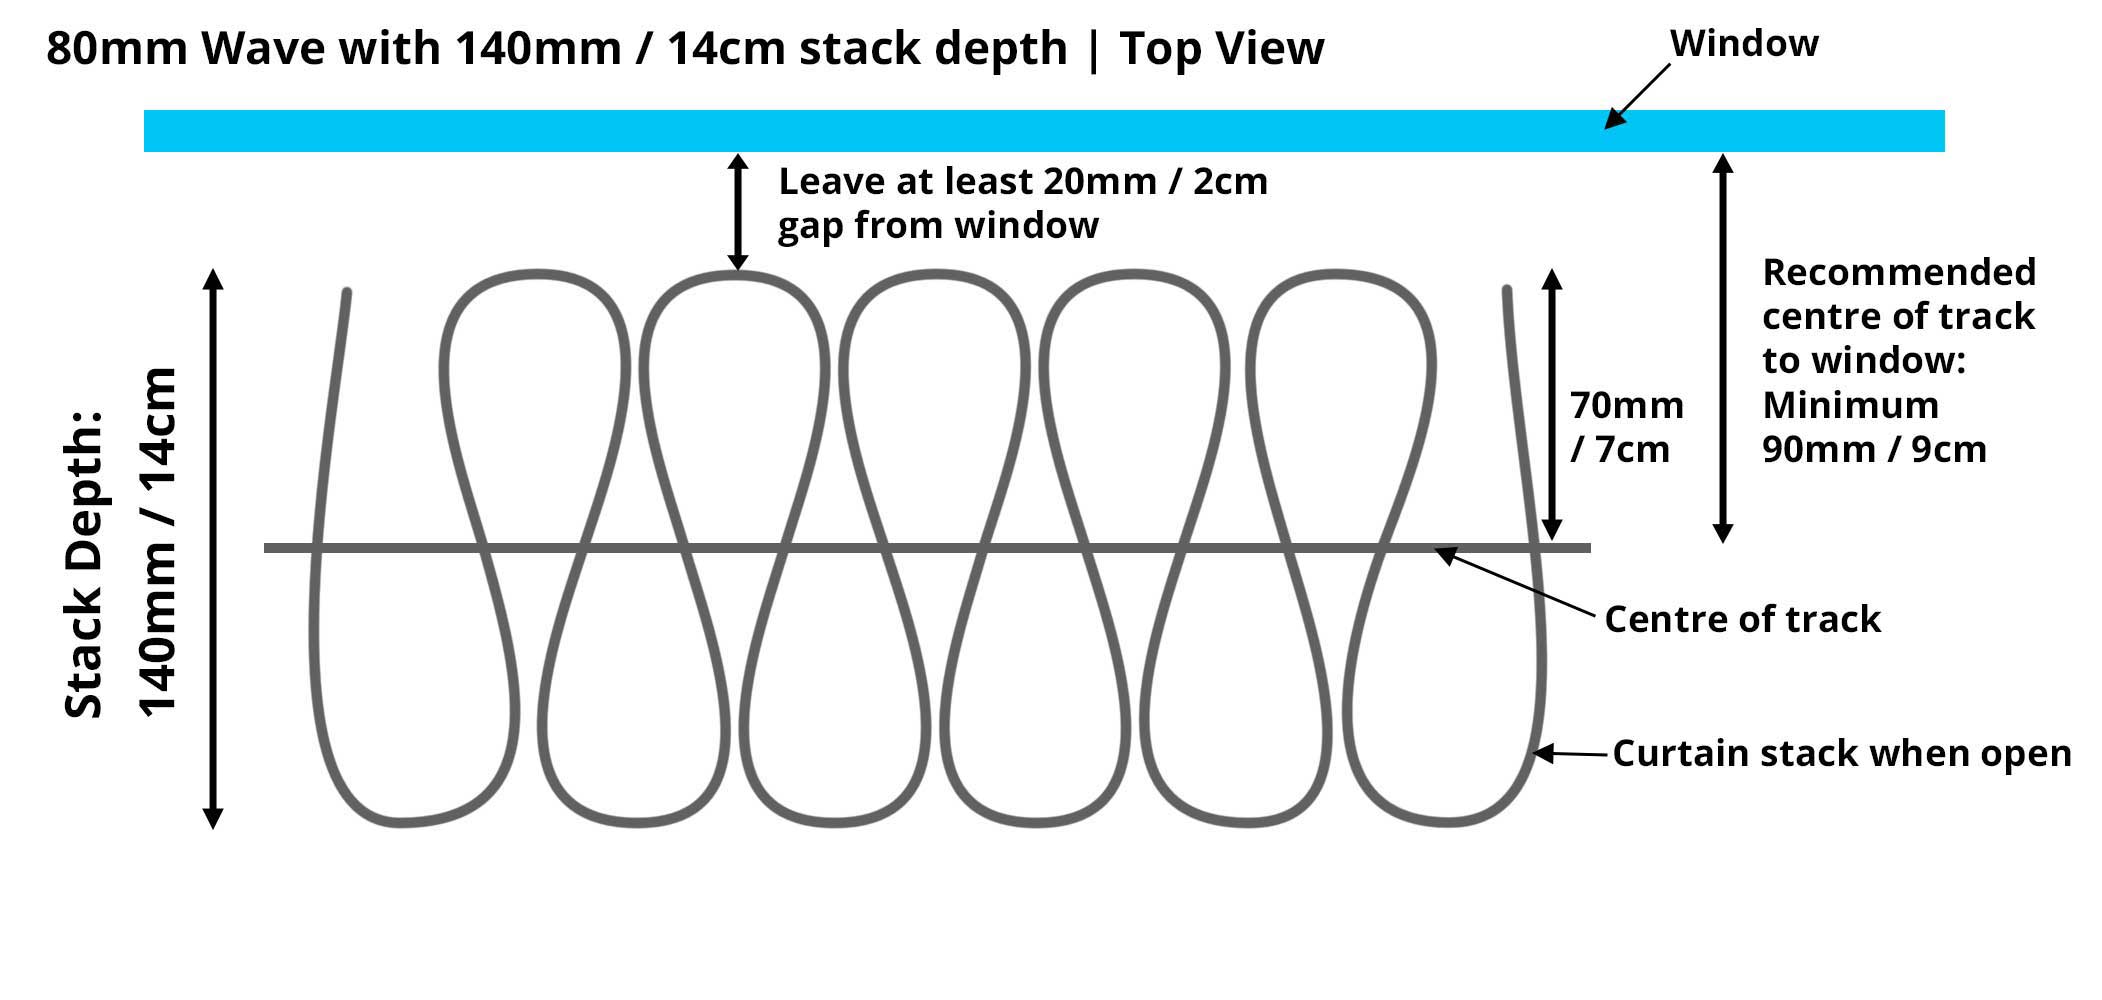 An image explaining the 140mm stack depth on a 80mm Wave curtain